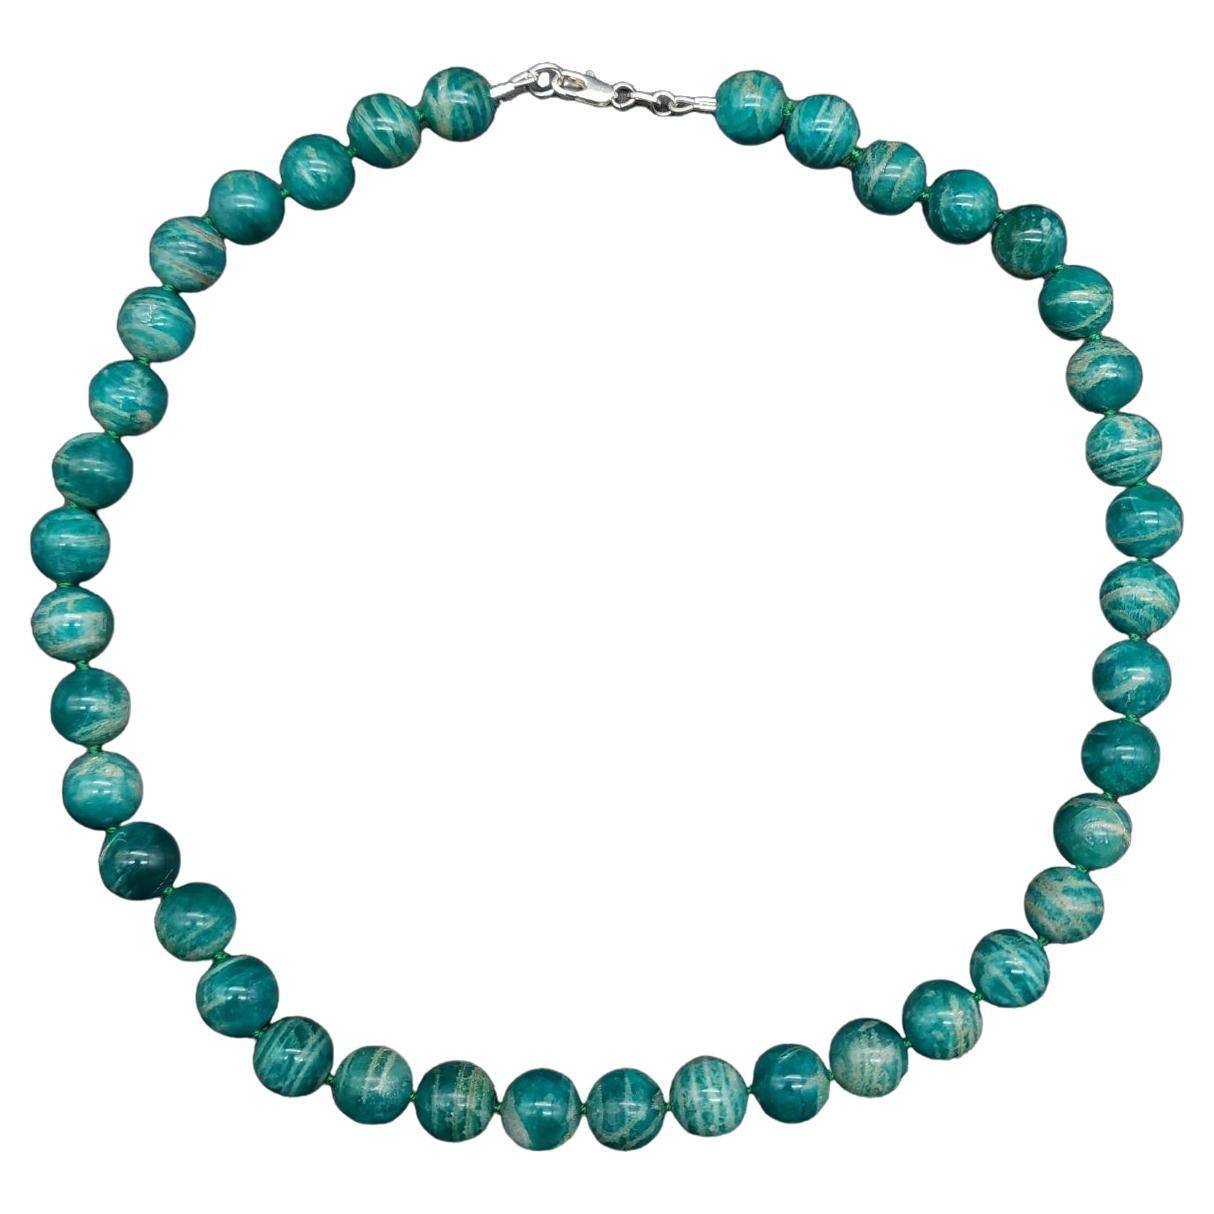 Polished Amazonite Bead Necklace, Sterling Silver Clasp, Vintage, Collar For Sale